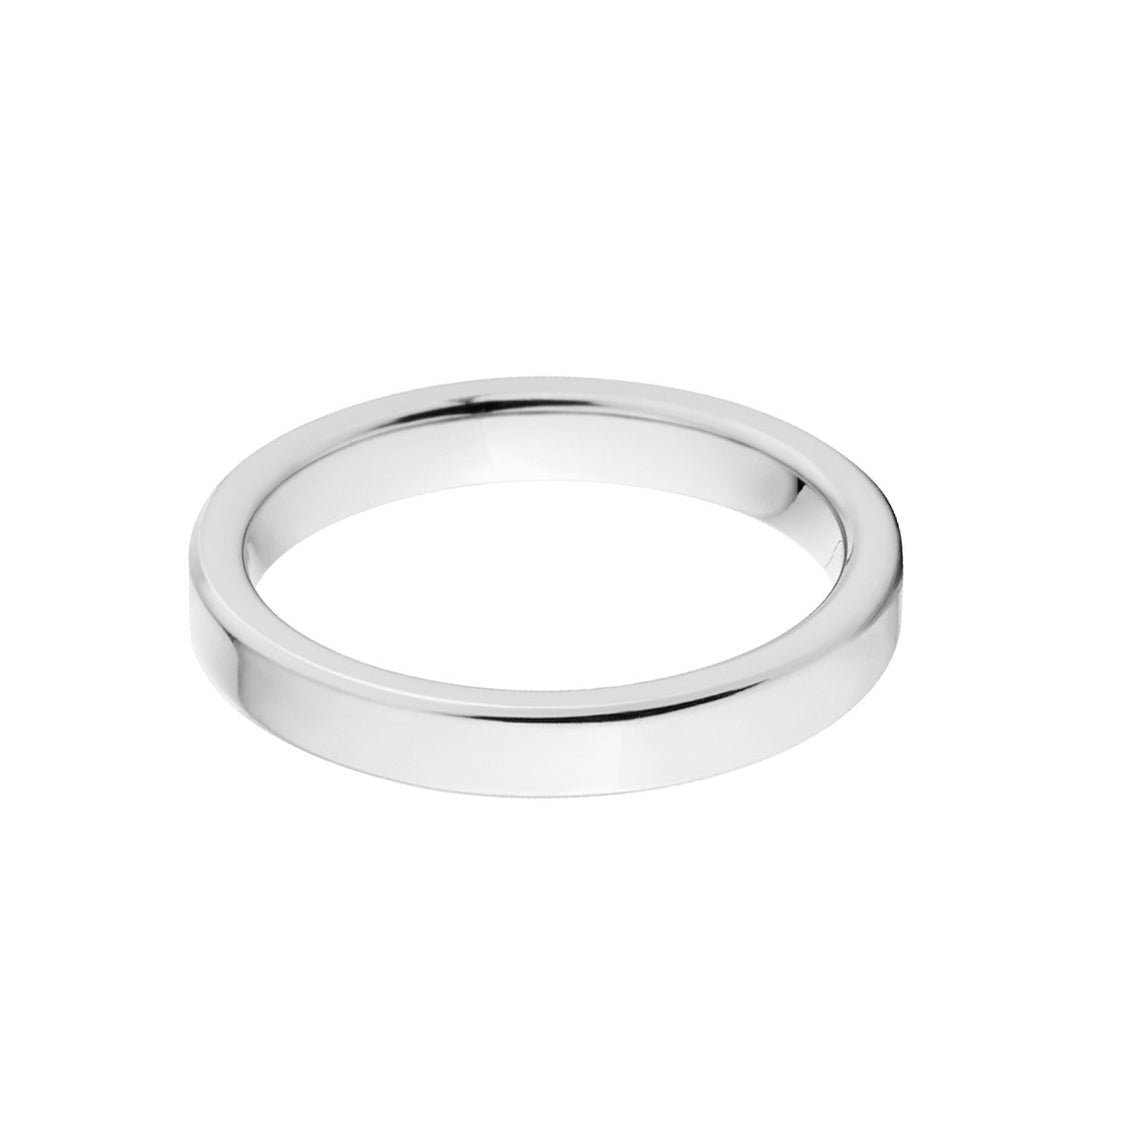 3mm wide cobalt wedding band with a flat profile and polish finish